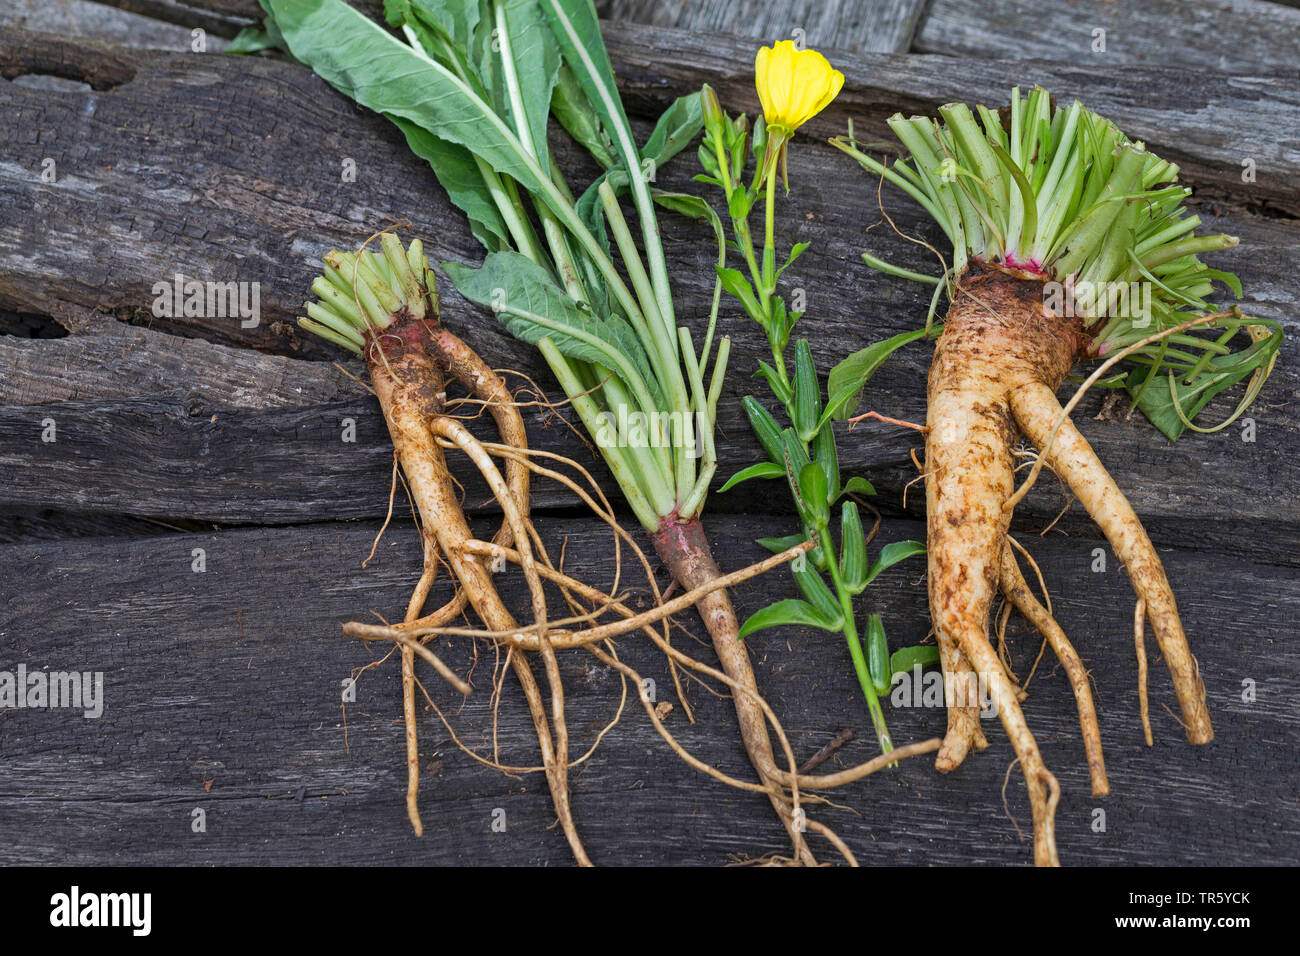 common evening primrose (Oenothera biennis), collected evening primrose roots, Germany Stock Photo